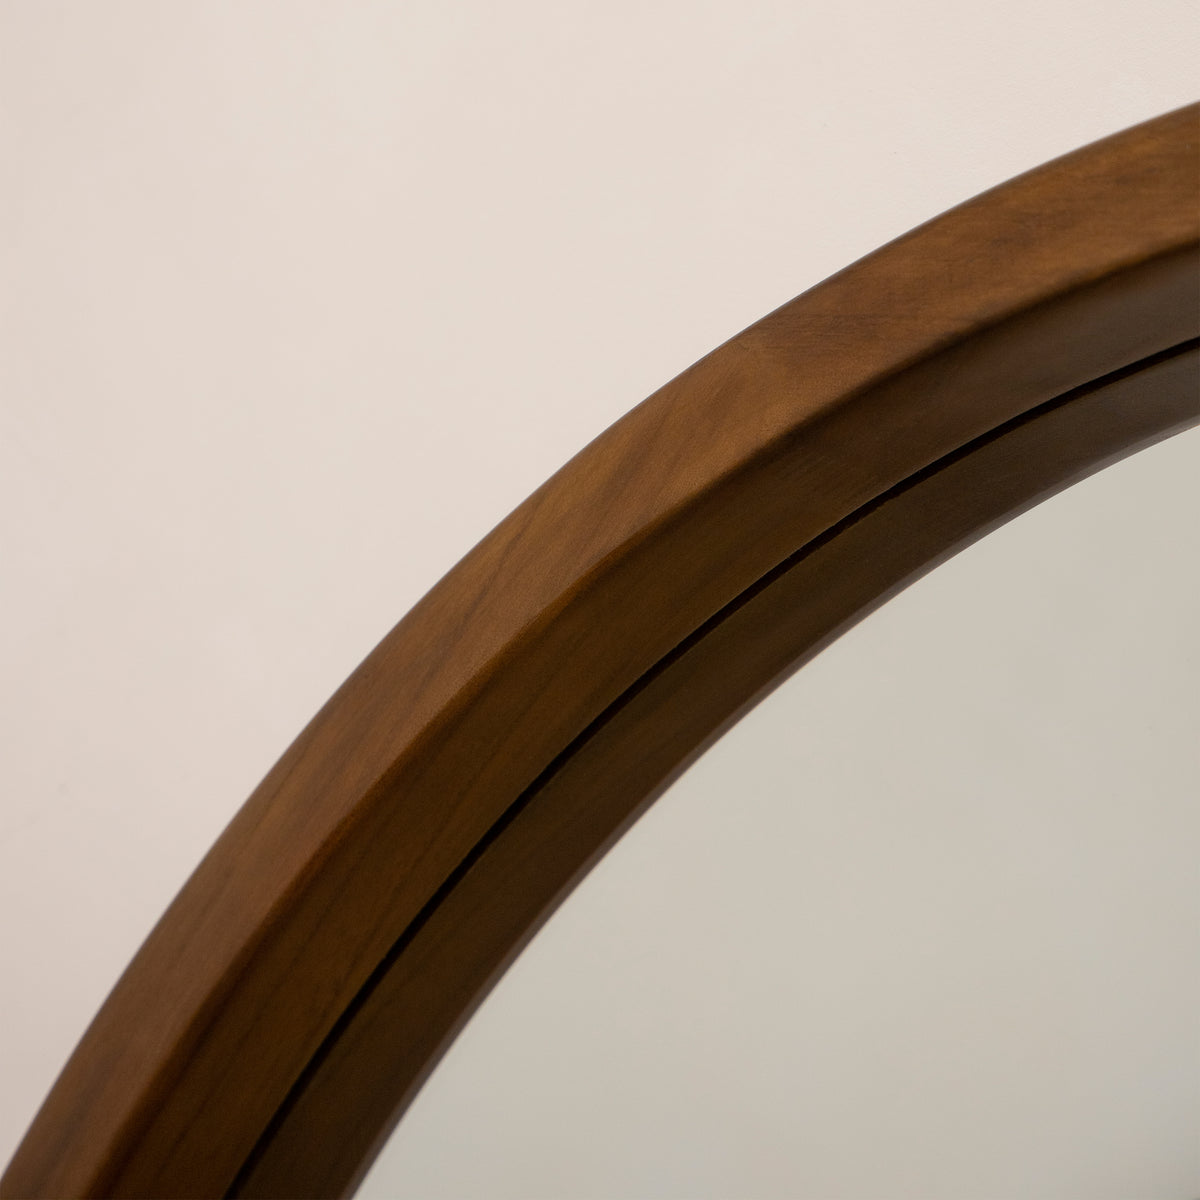 Detail shot of Full Length Extra Large Arched Walnut Mirror arched frame design